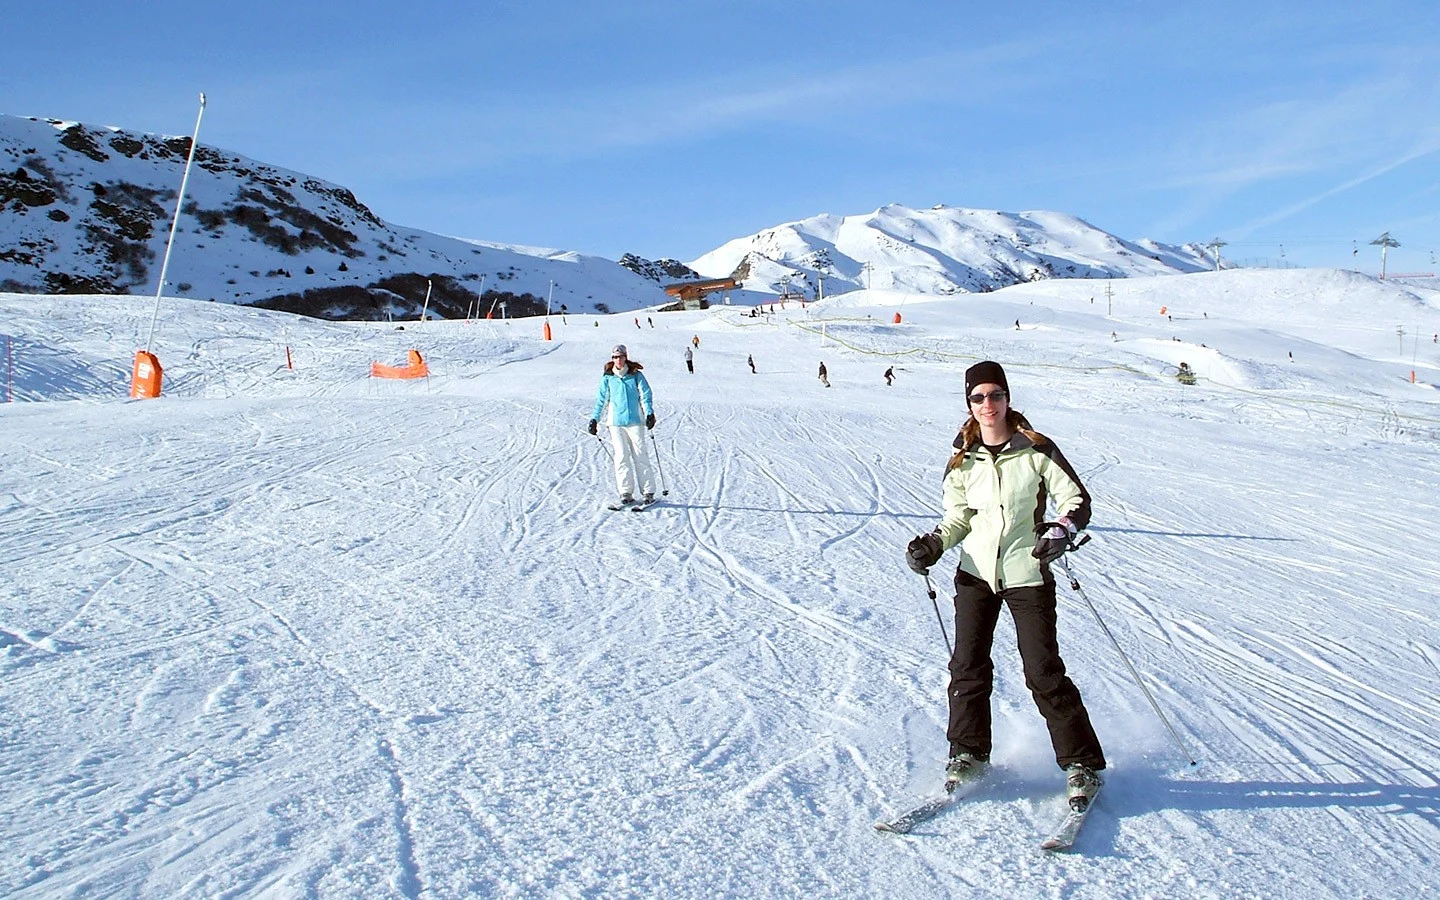 Skiing the Grive piste